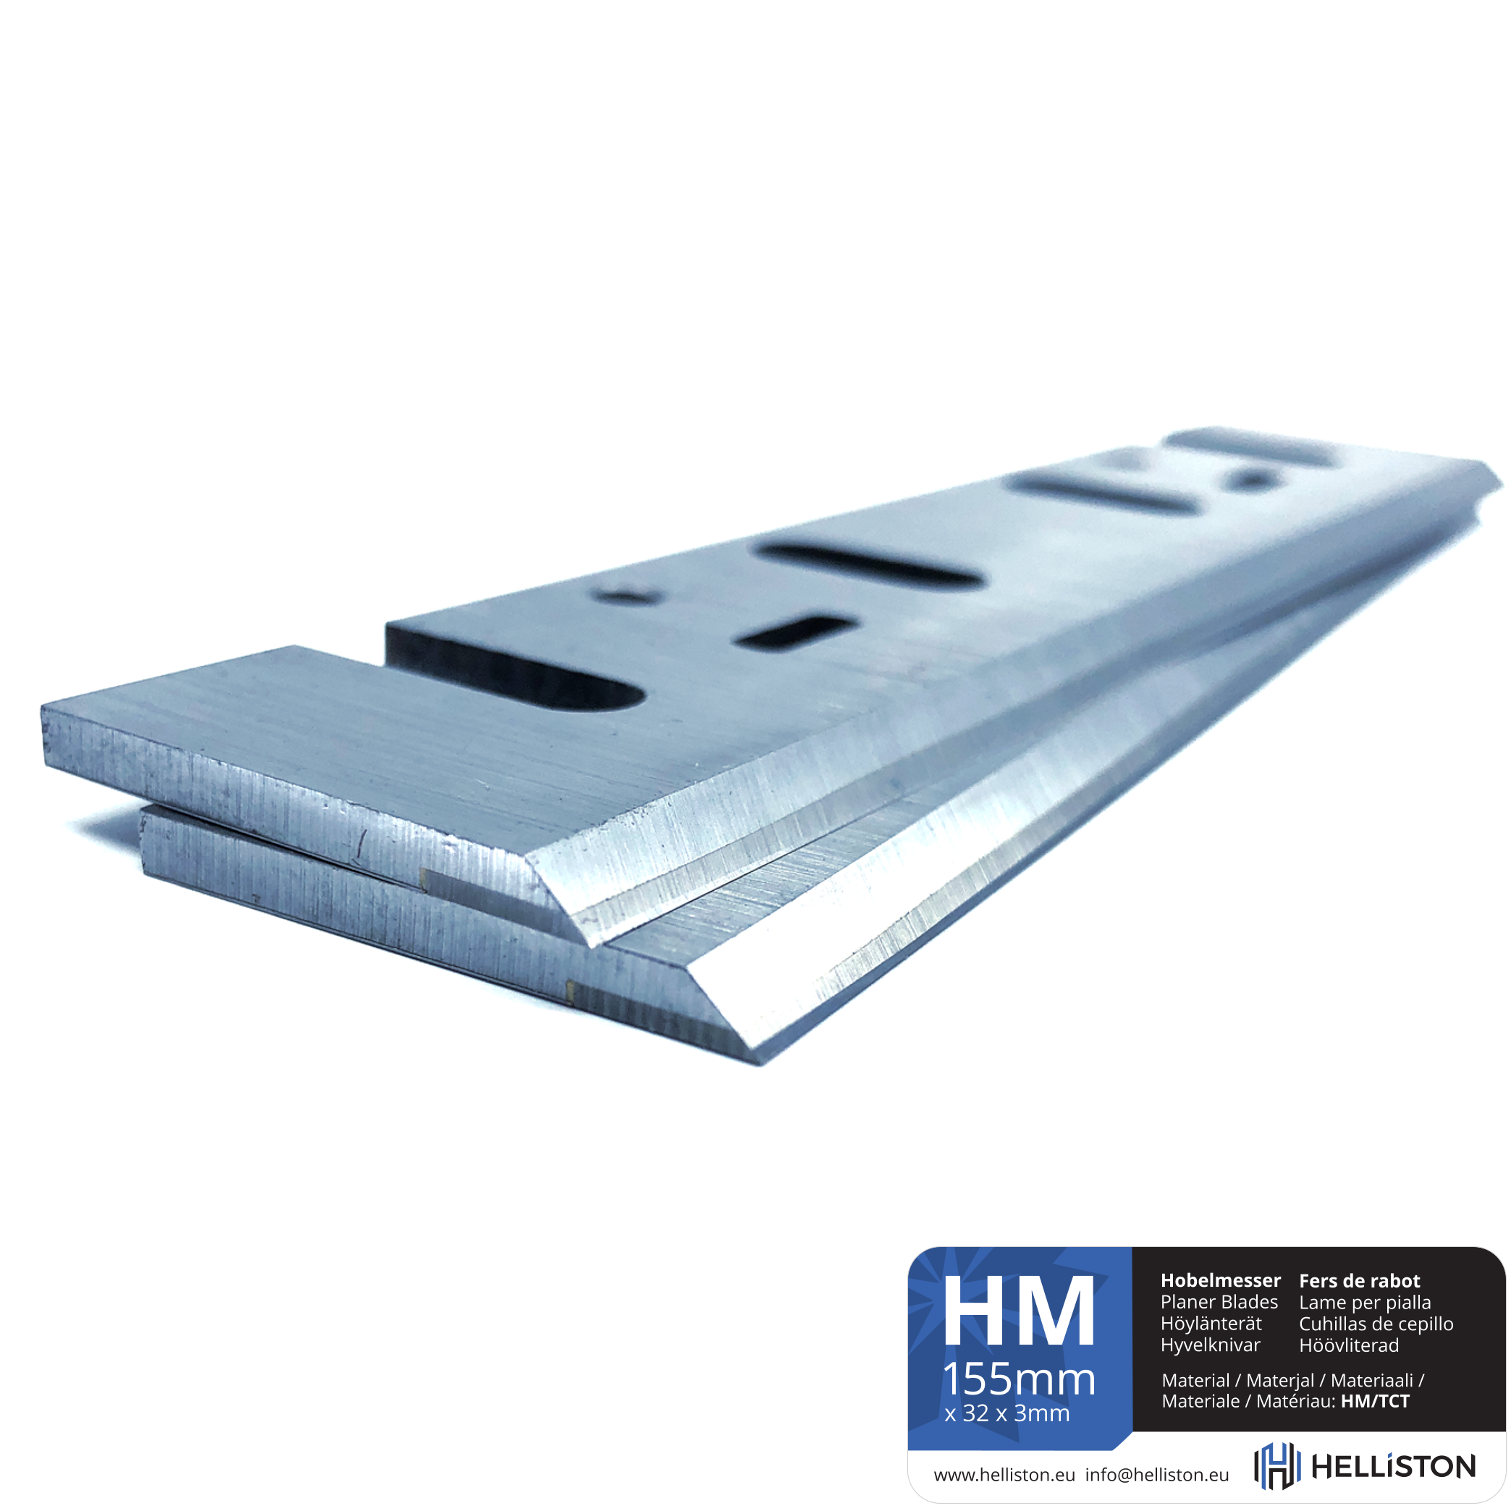 HM Planer Blades 155 x 32 x 3mm, Wolframcarbid, Tungsten Carbide Blades, Hard metal, Makita, 1805, 1805B, 1805N, Europe, Germany, England, Great Britain, France, de, fr, co.uk, resharpanable, sharpanple, planer blade sharping, sharp, durable, Canada, USA, Australia, Carpentry, woodworking, UK, electric hand planer, review, rewiev, parts, power planer, manual